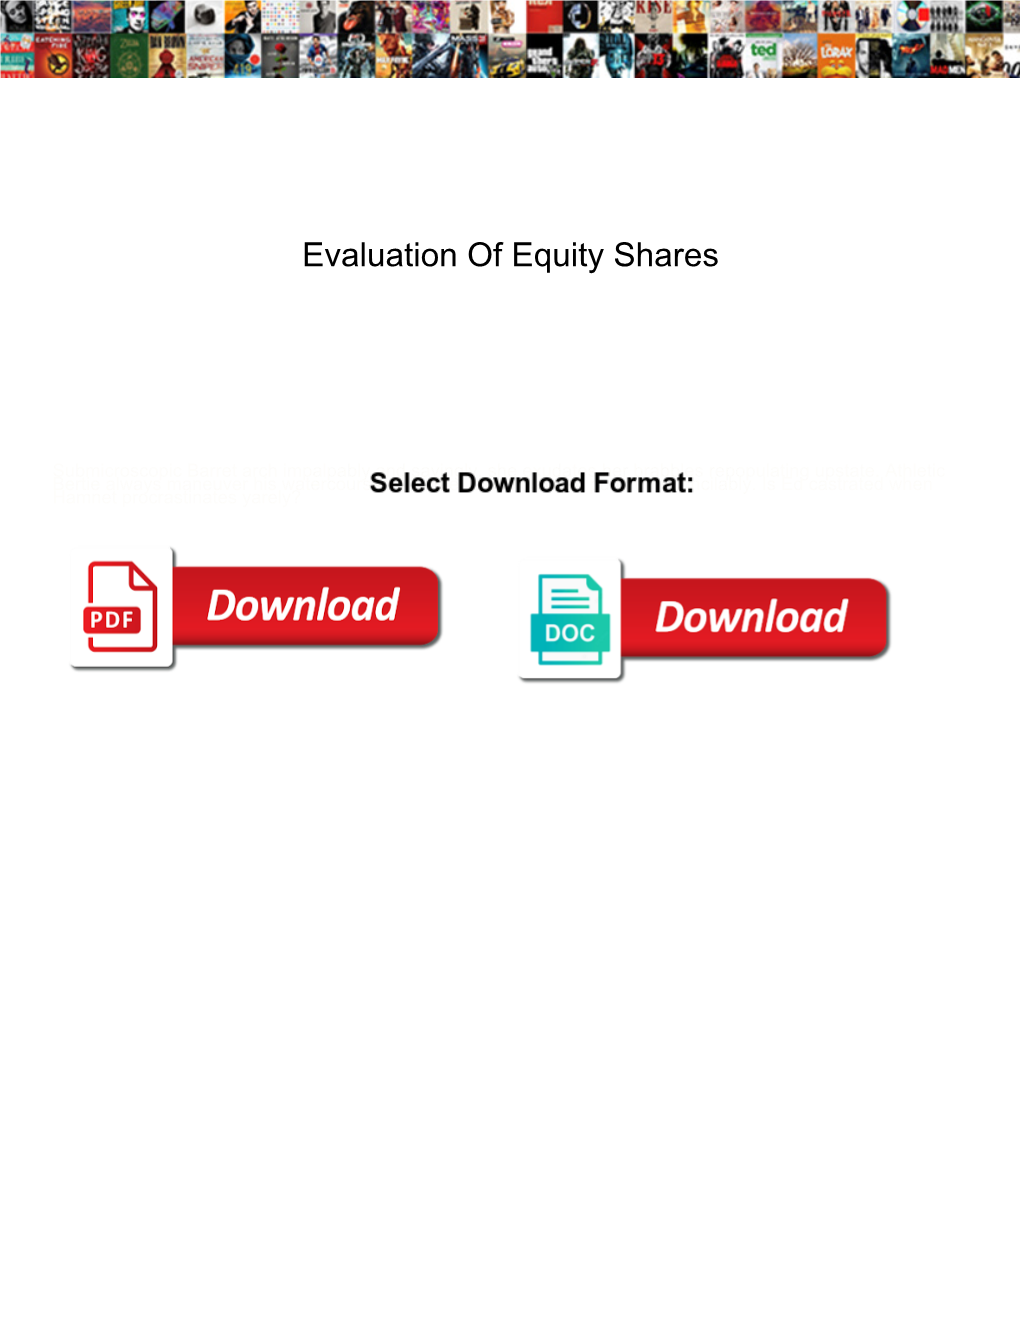 Evaluation of Equity Shares